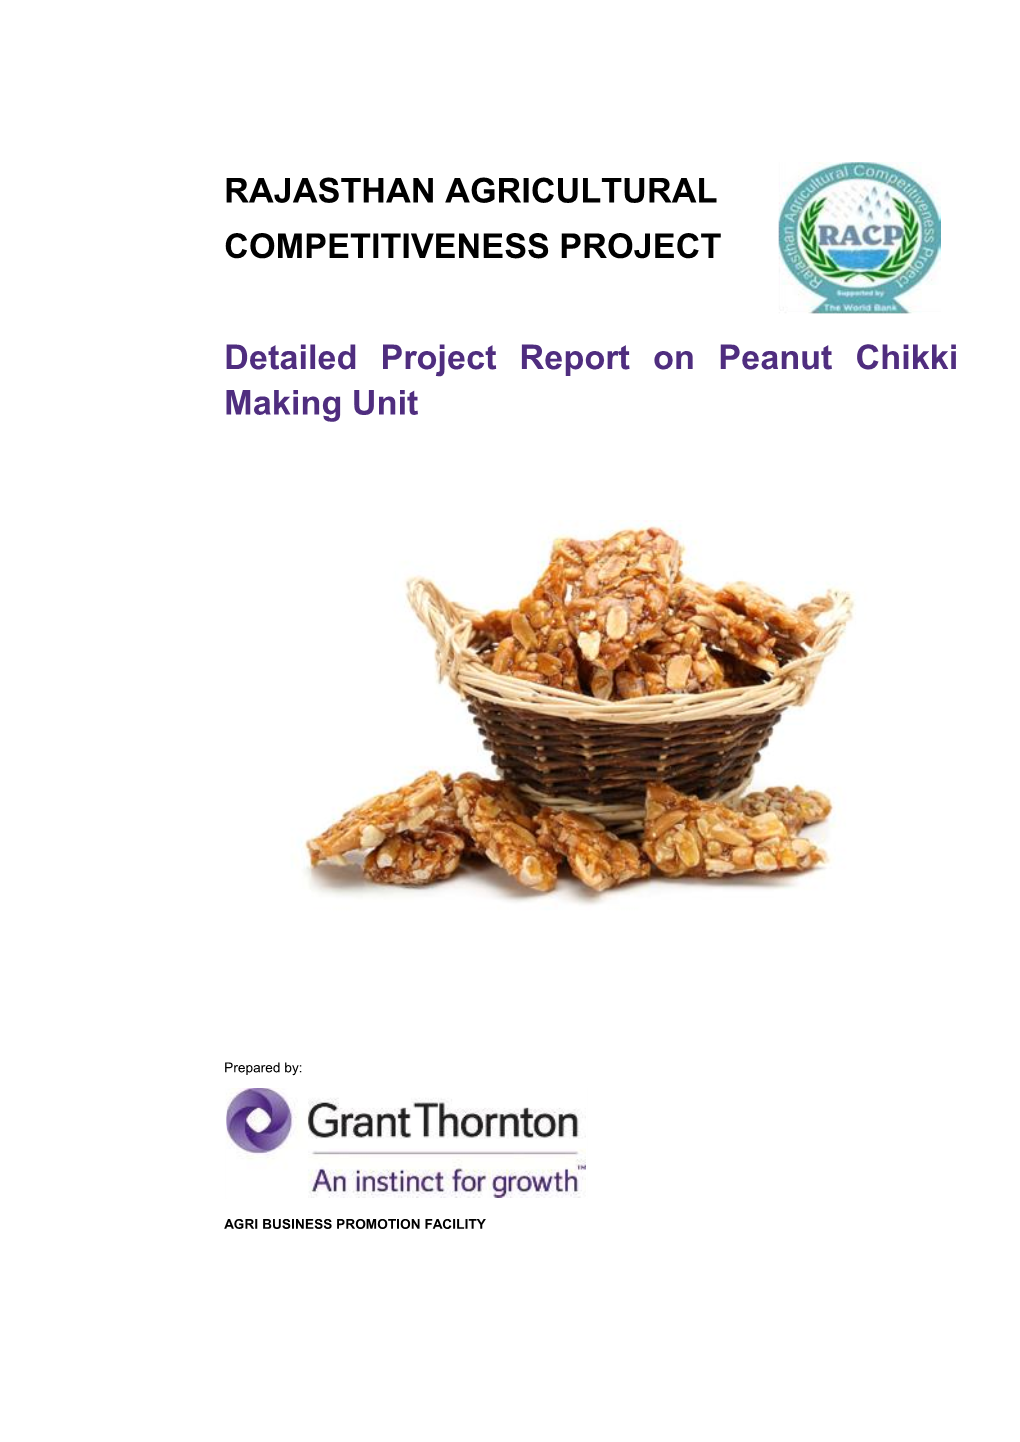 Detailed Project Report on Peanut Chikki Making Unit